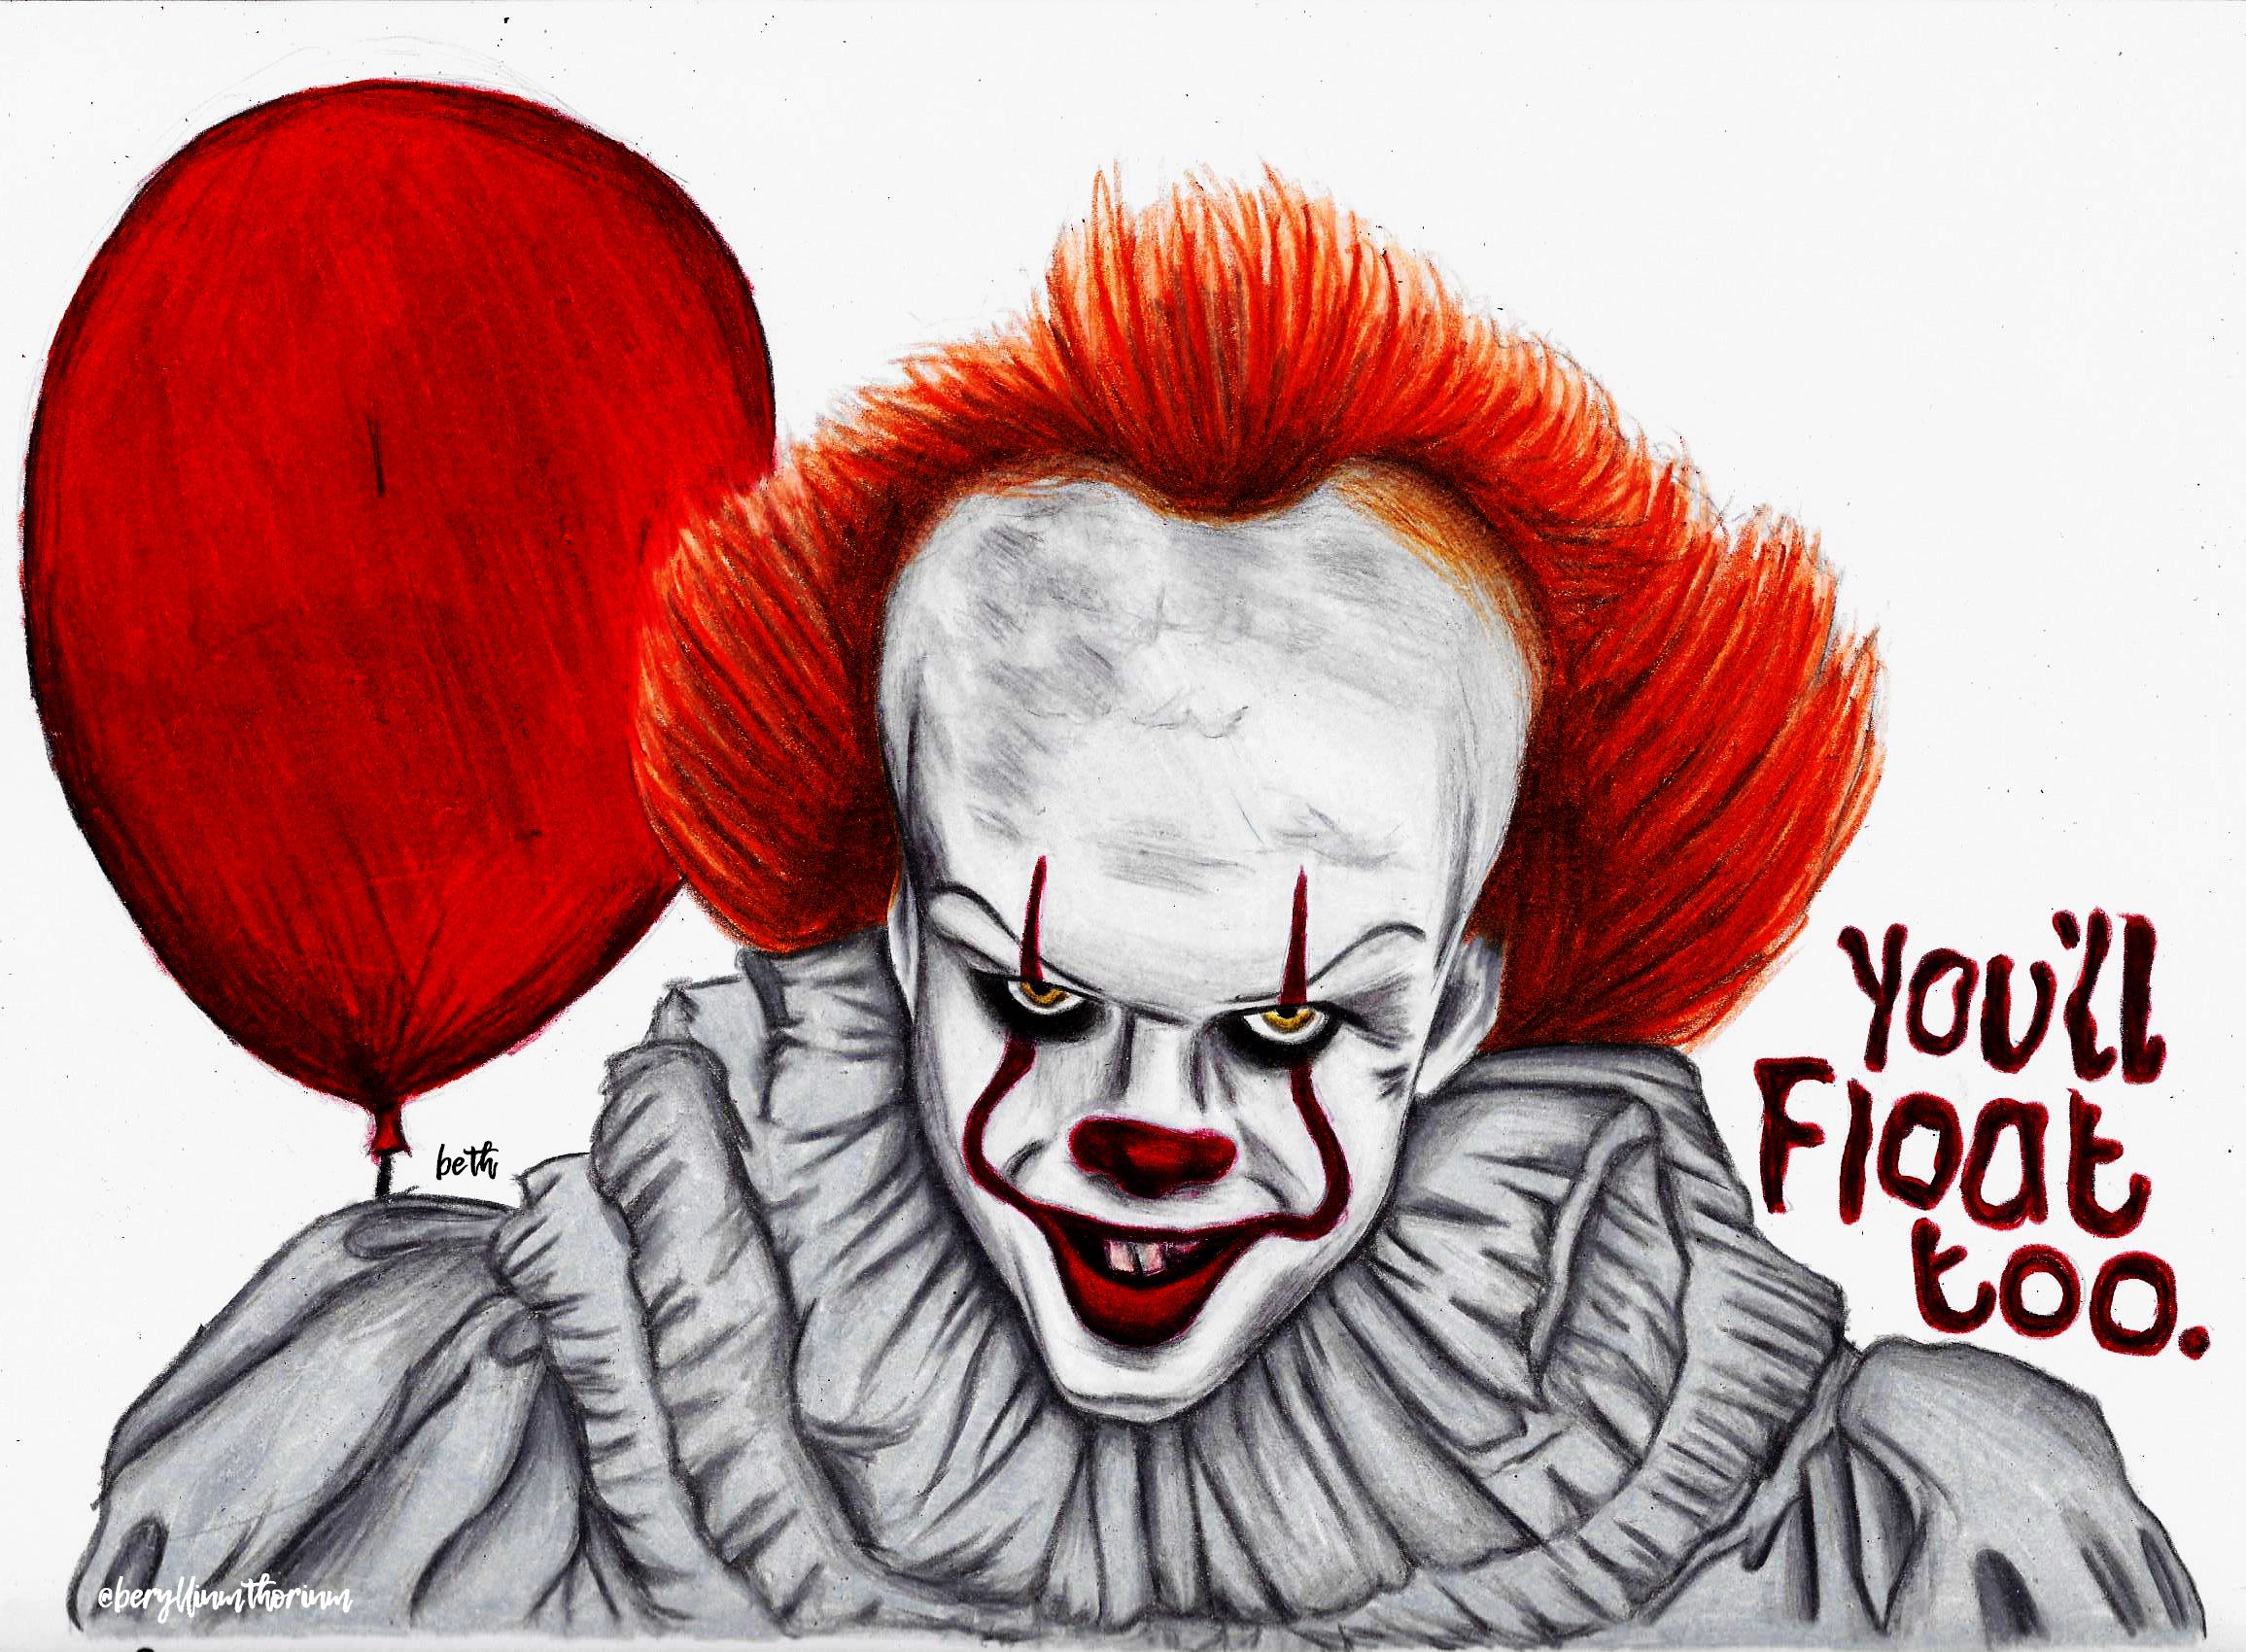 2311x1700 pennywise drawing drawing in drawings, pencil drawings - Pennywis...